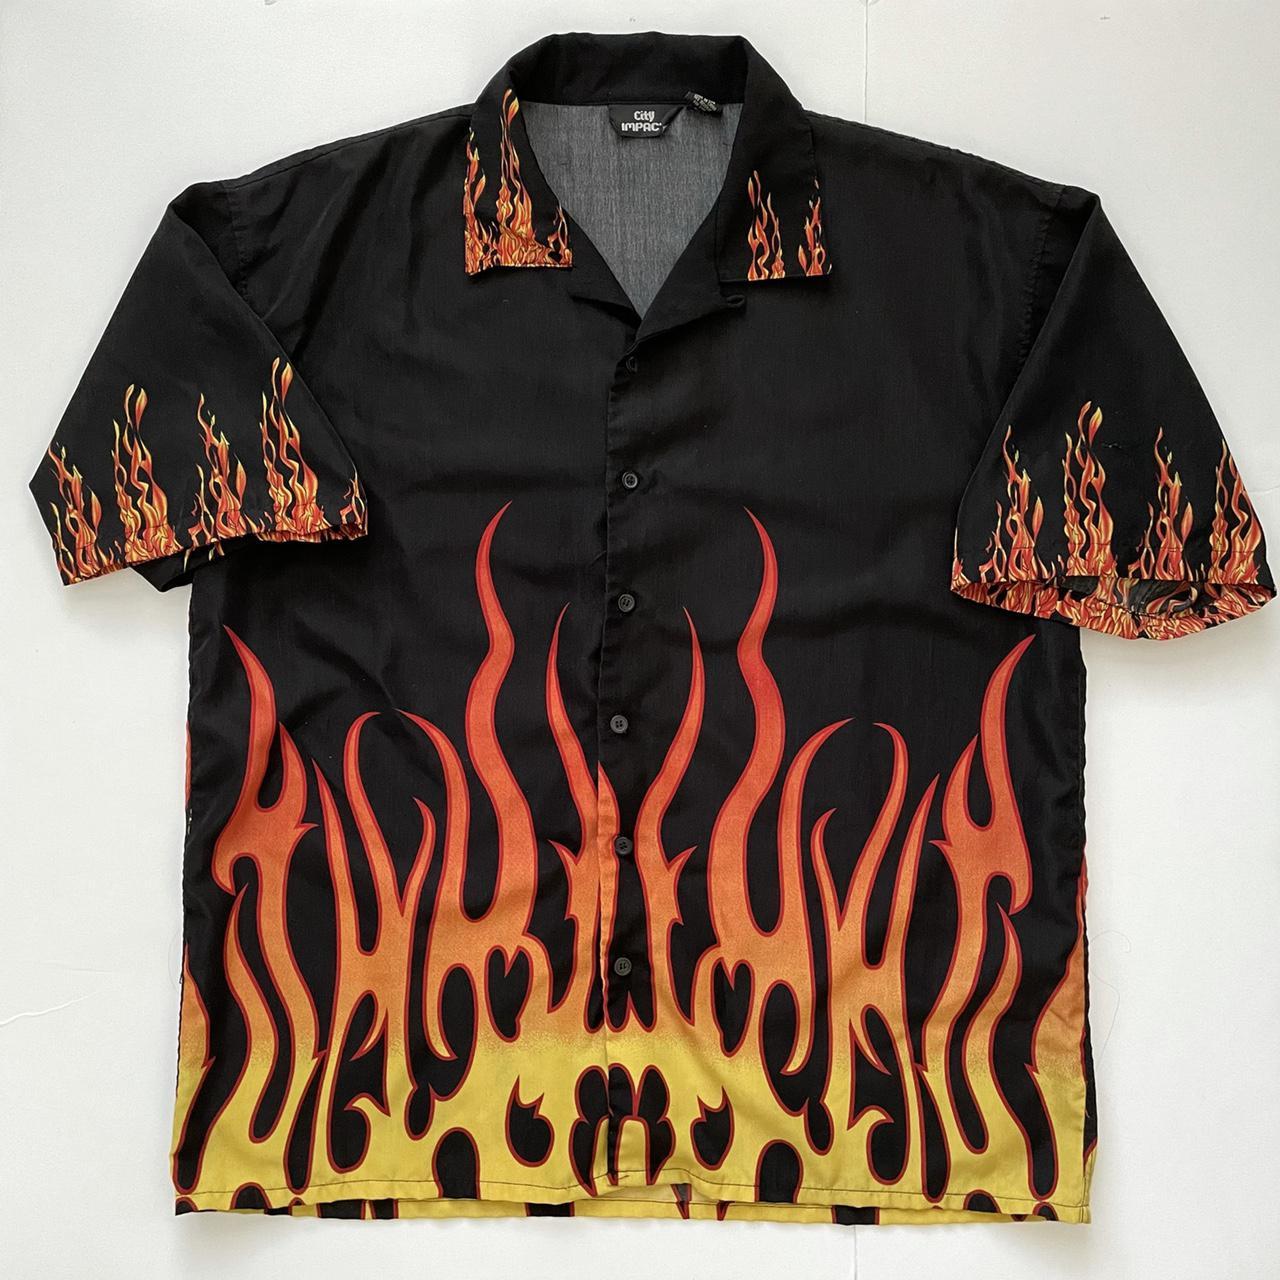 Product Image 1 - Vintage 1990s Guy Fieri Flame